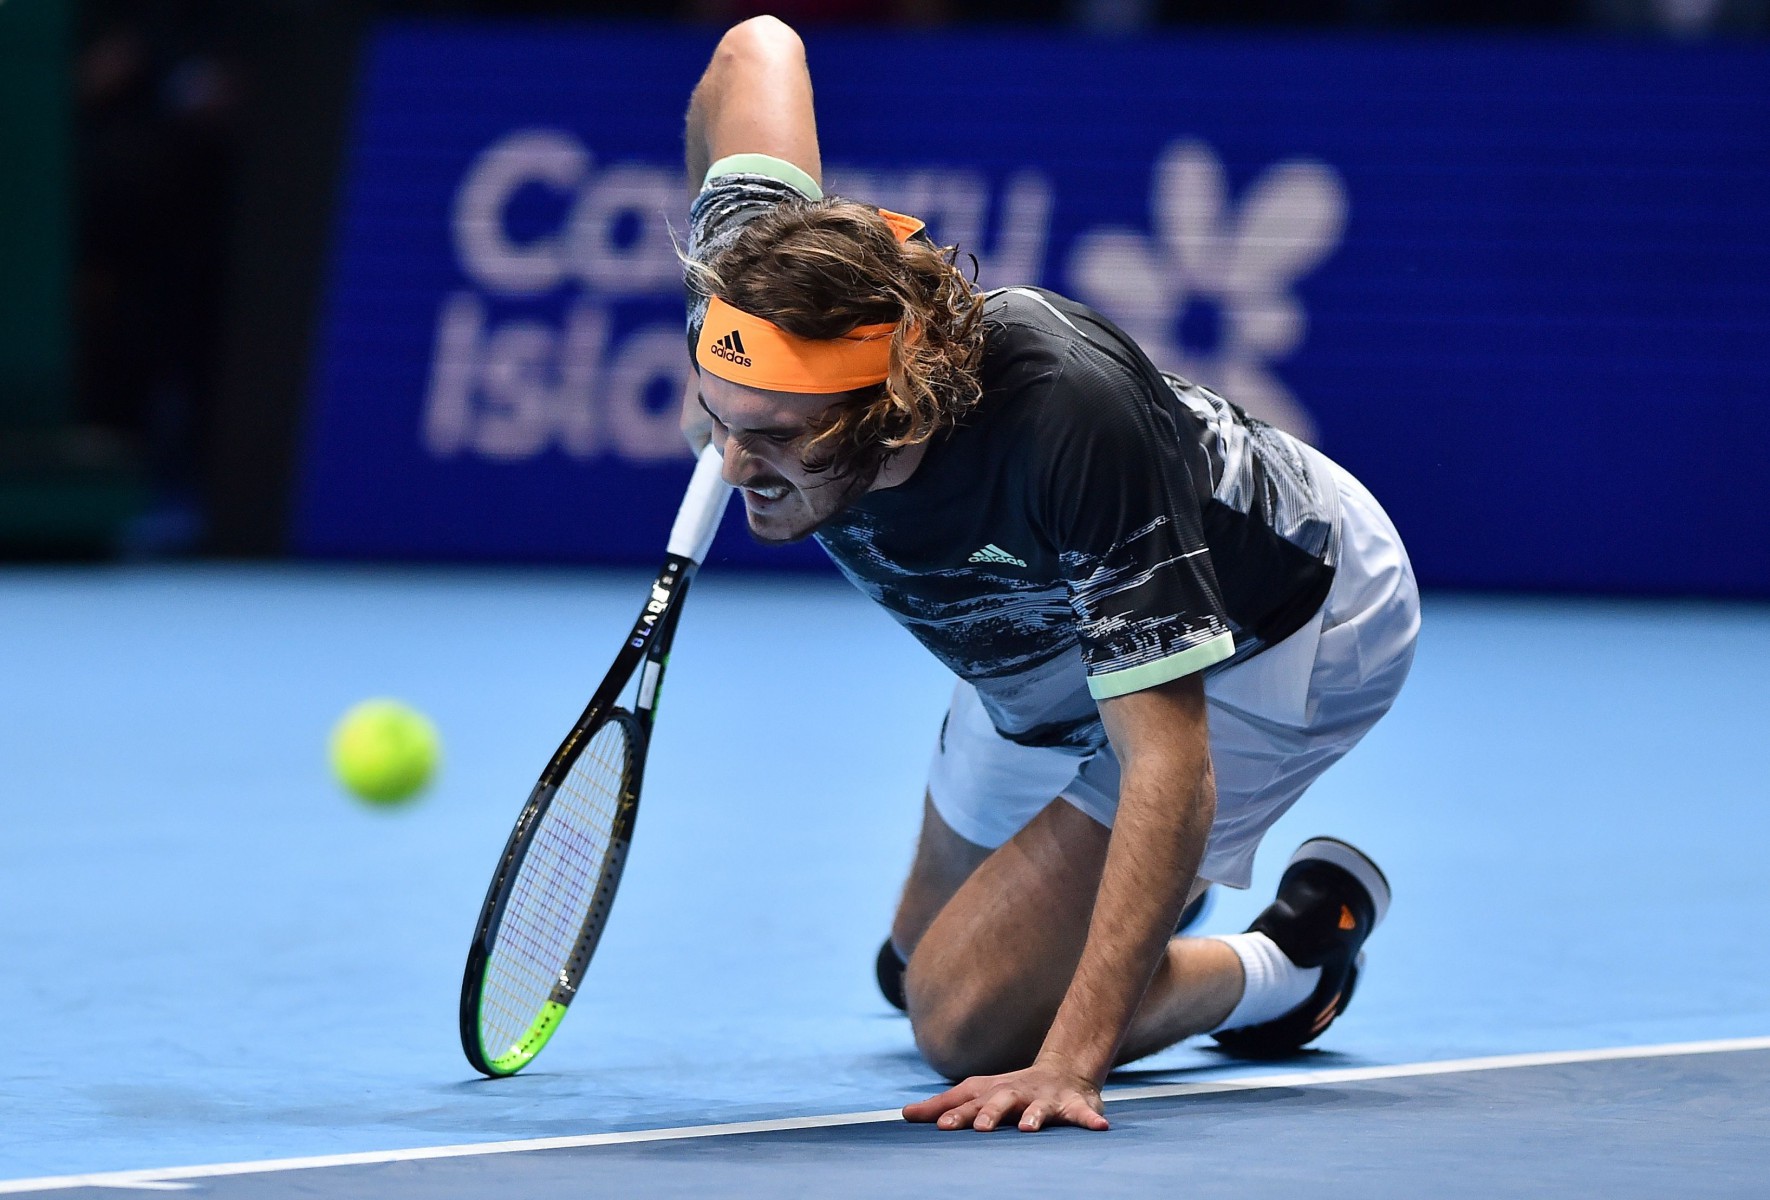 Tsitsipas took a tumble early in the third set but got himself back on his feet to break with the very next point